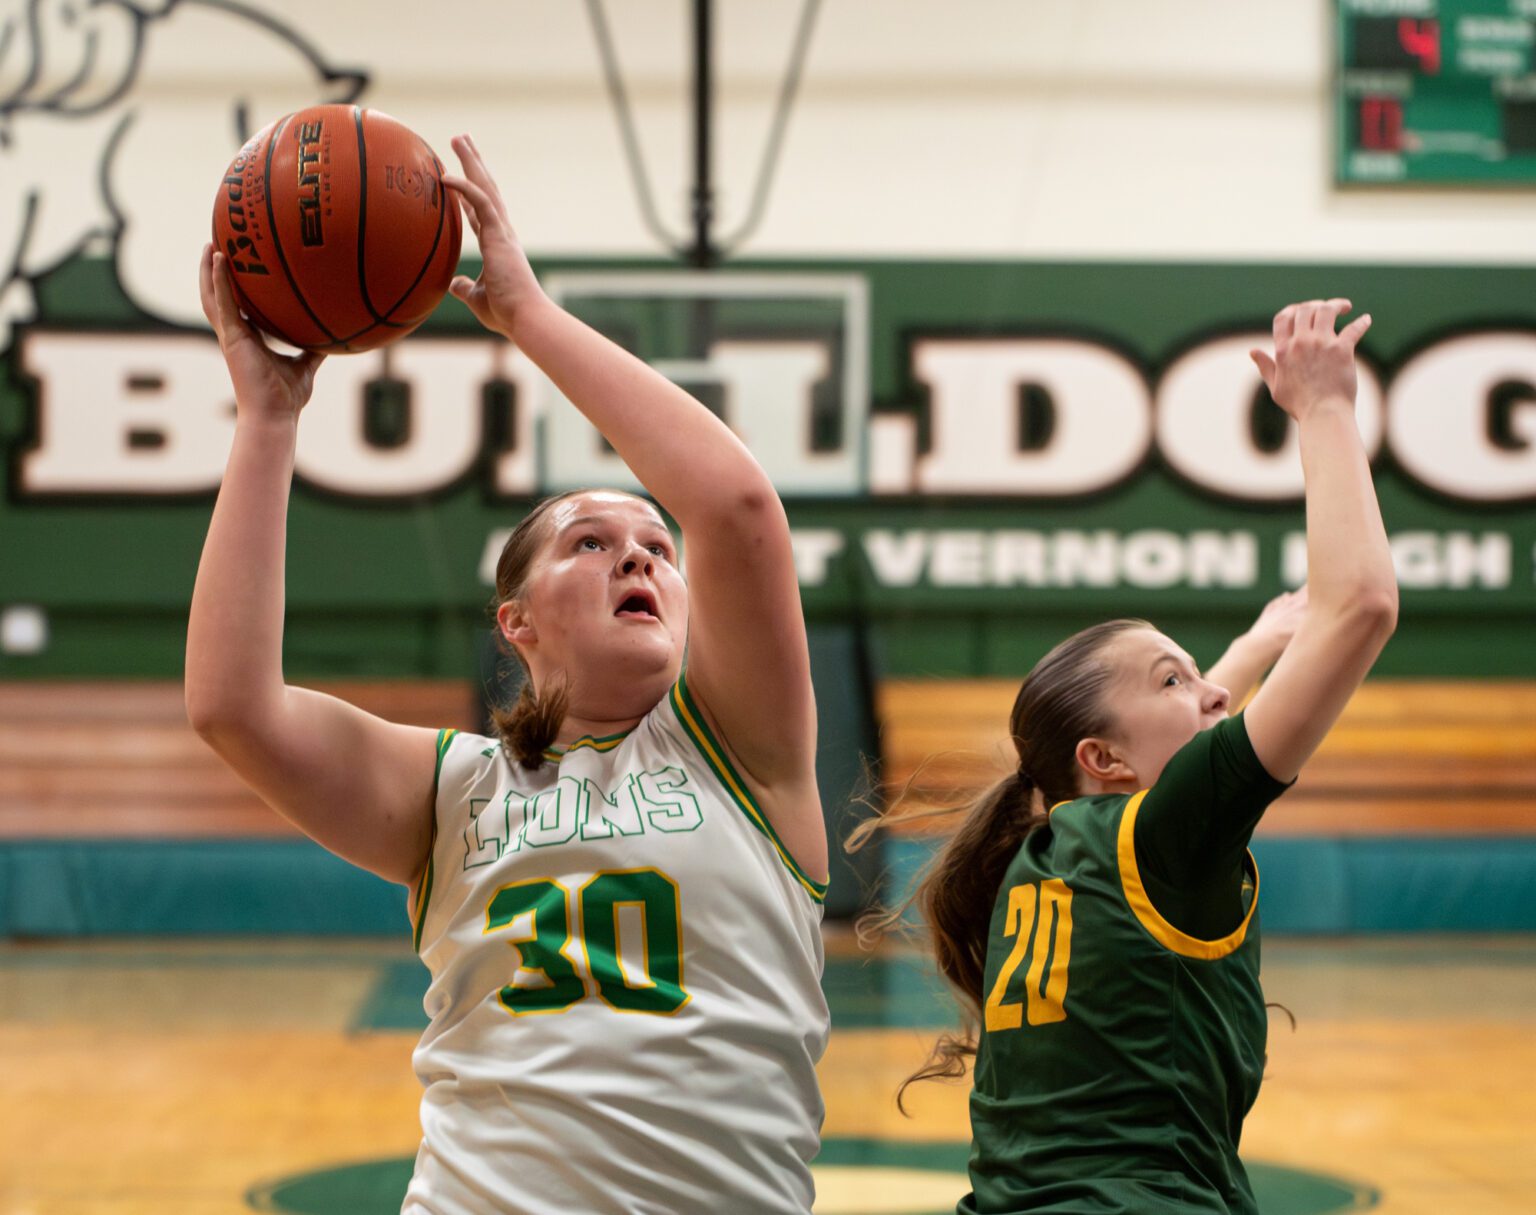 Lynden sophomore guard Payton Mills puts a rebound back up Saturday, Feb. 10 during the 2A District 1 semifinals against Sehome at Mount Vernon High School. Mill's game-high 18 points helped the Lions to a 60-20 win.